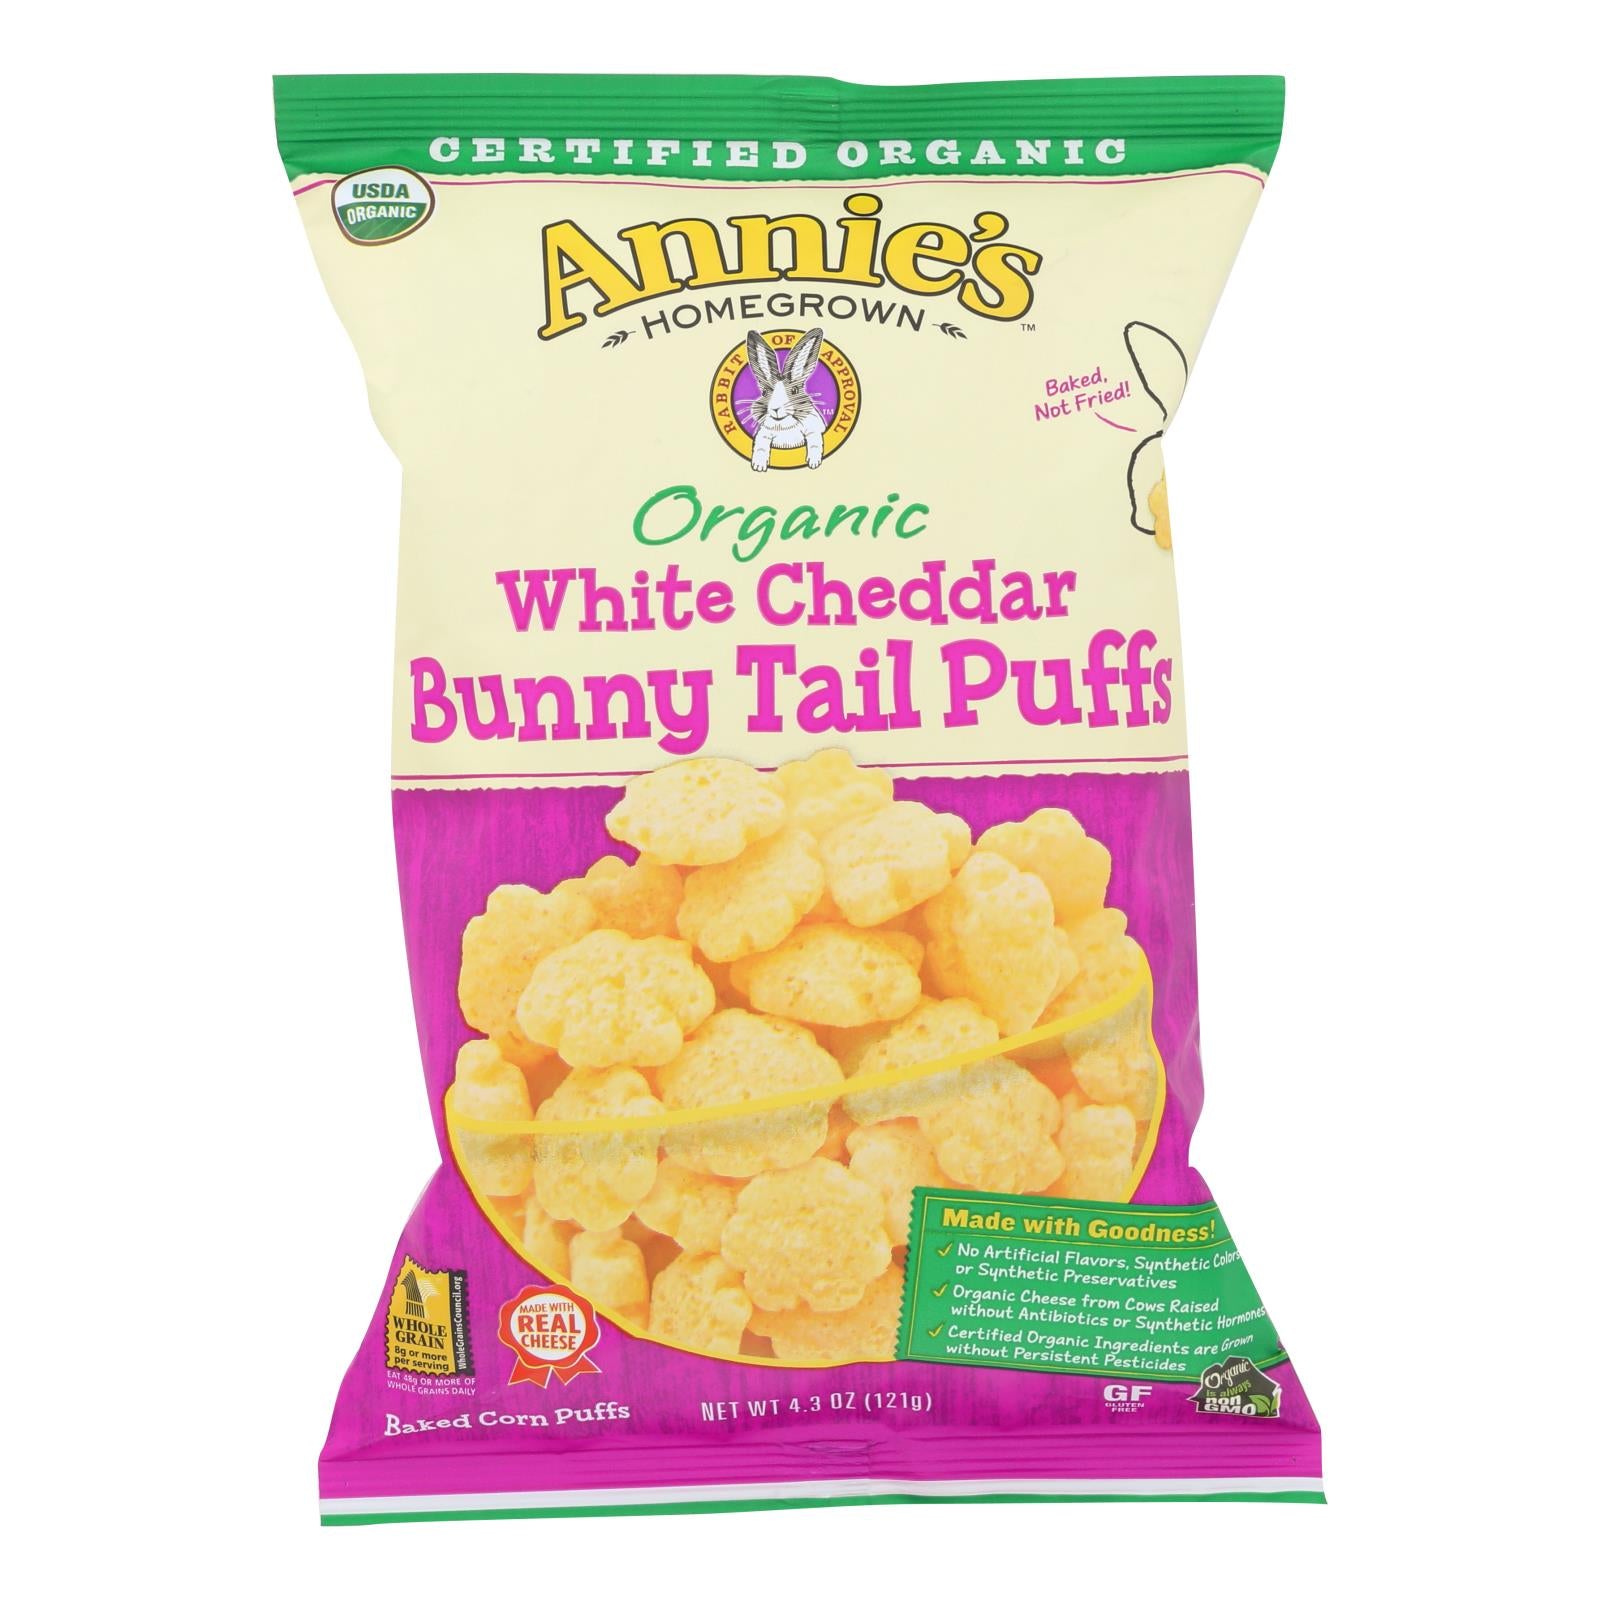 Annie'S Homegrown, Annie's Homegrown Organic Cheese Puffs - White Cheddar Bunny Tails - Case of 12 - 4.3 oz (Pack of 12)